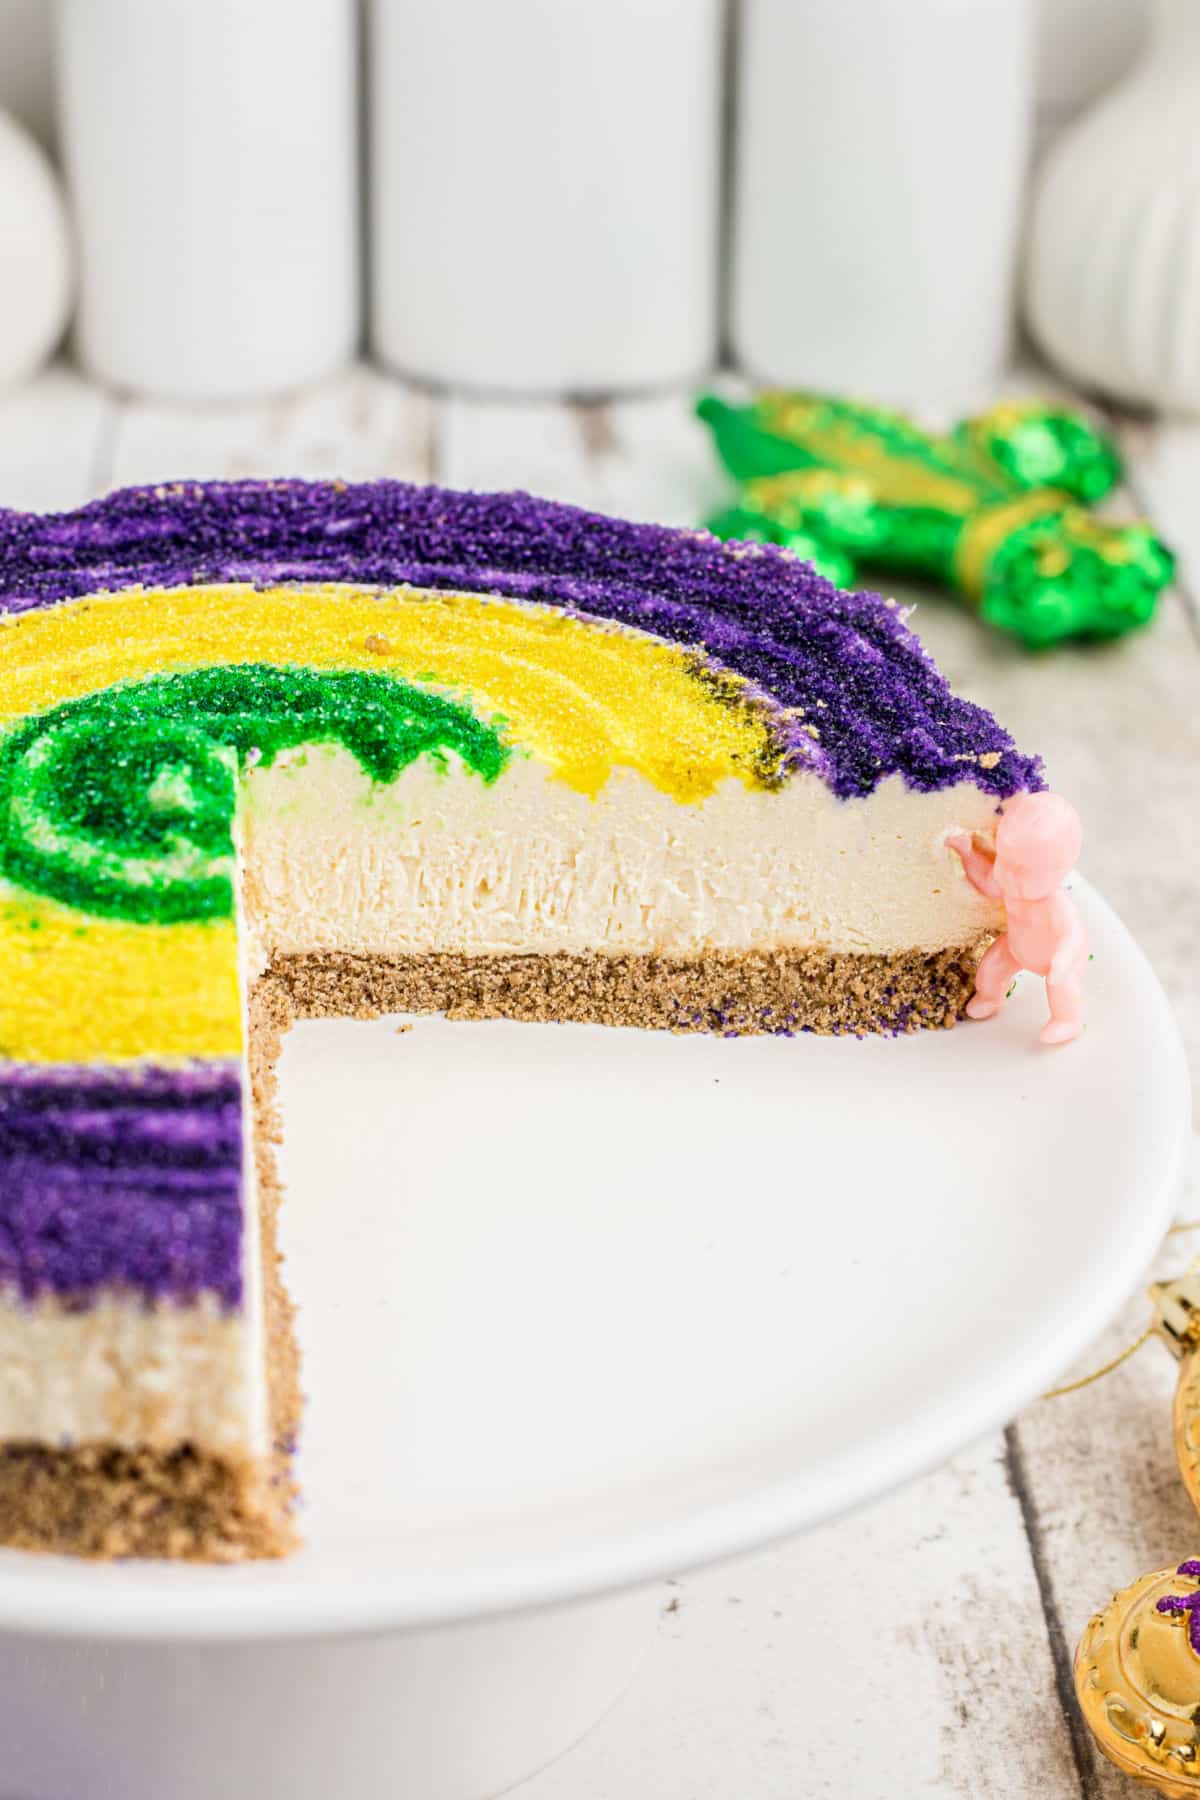 A mardi gras cheesecake with slices missing.